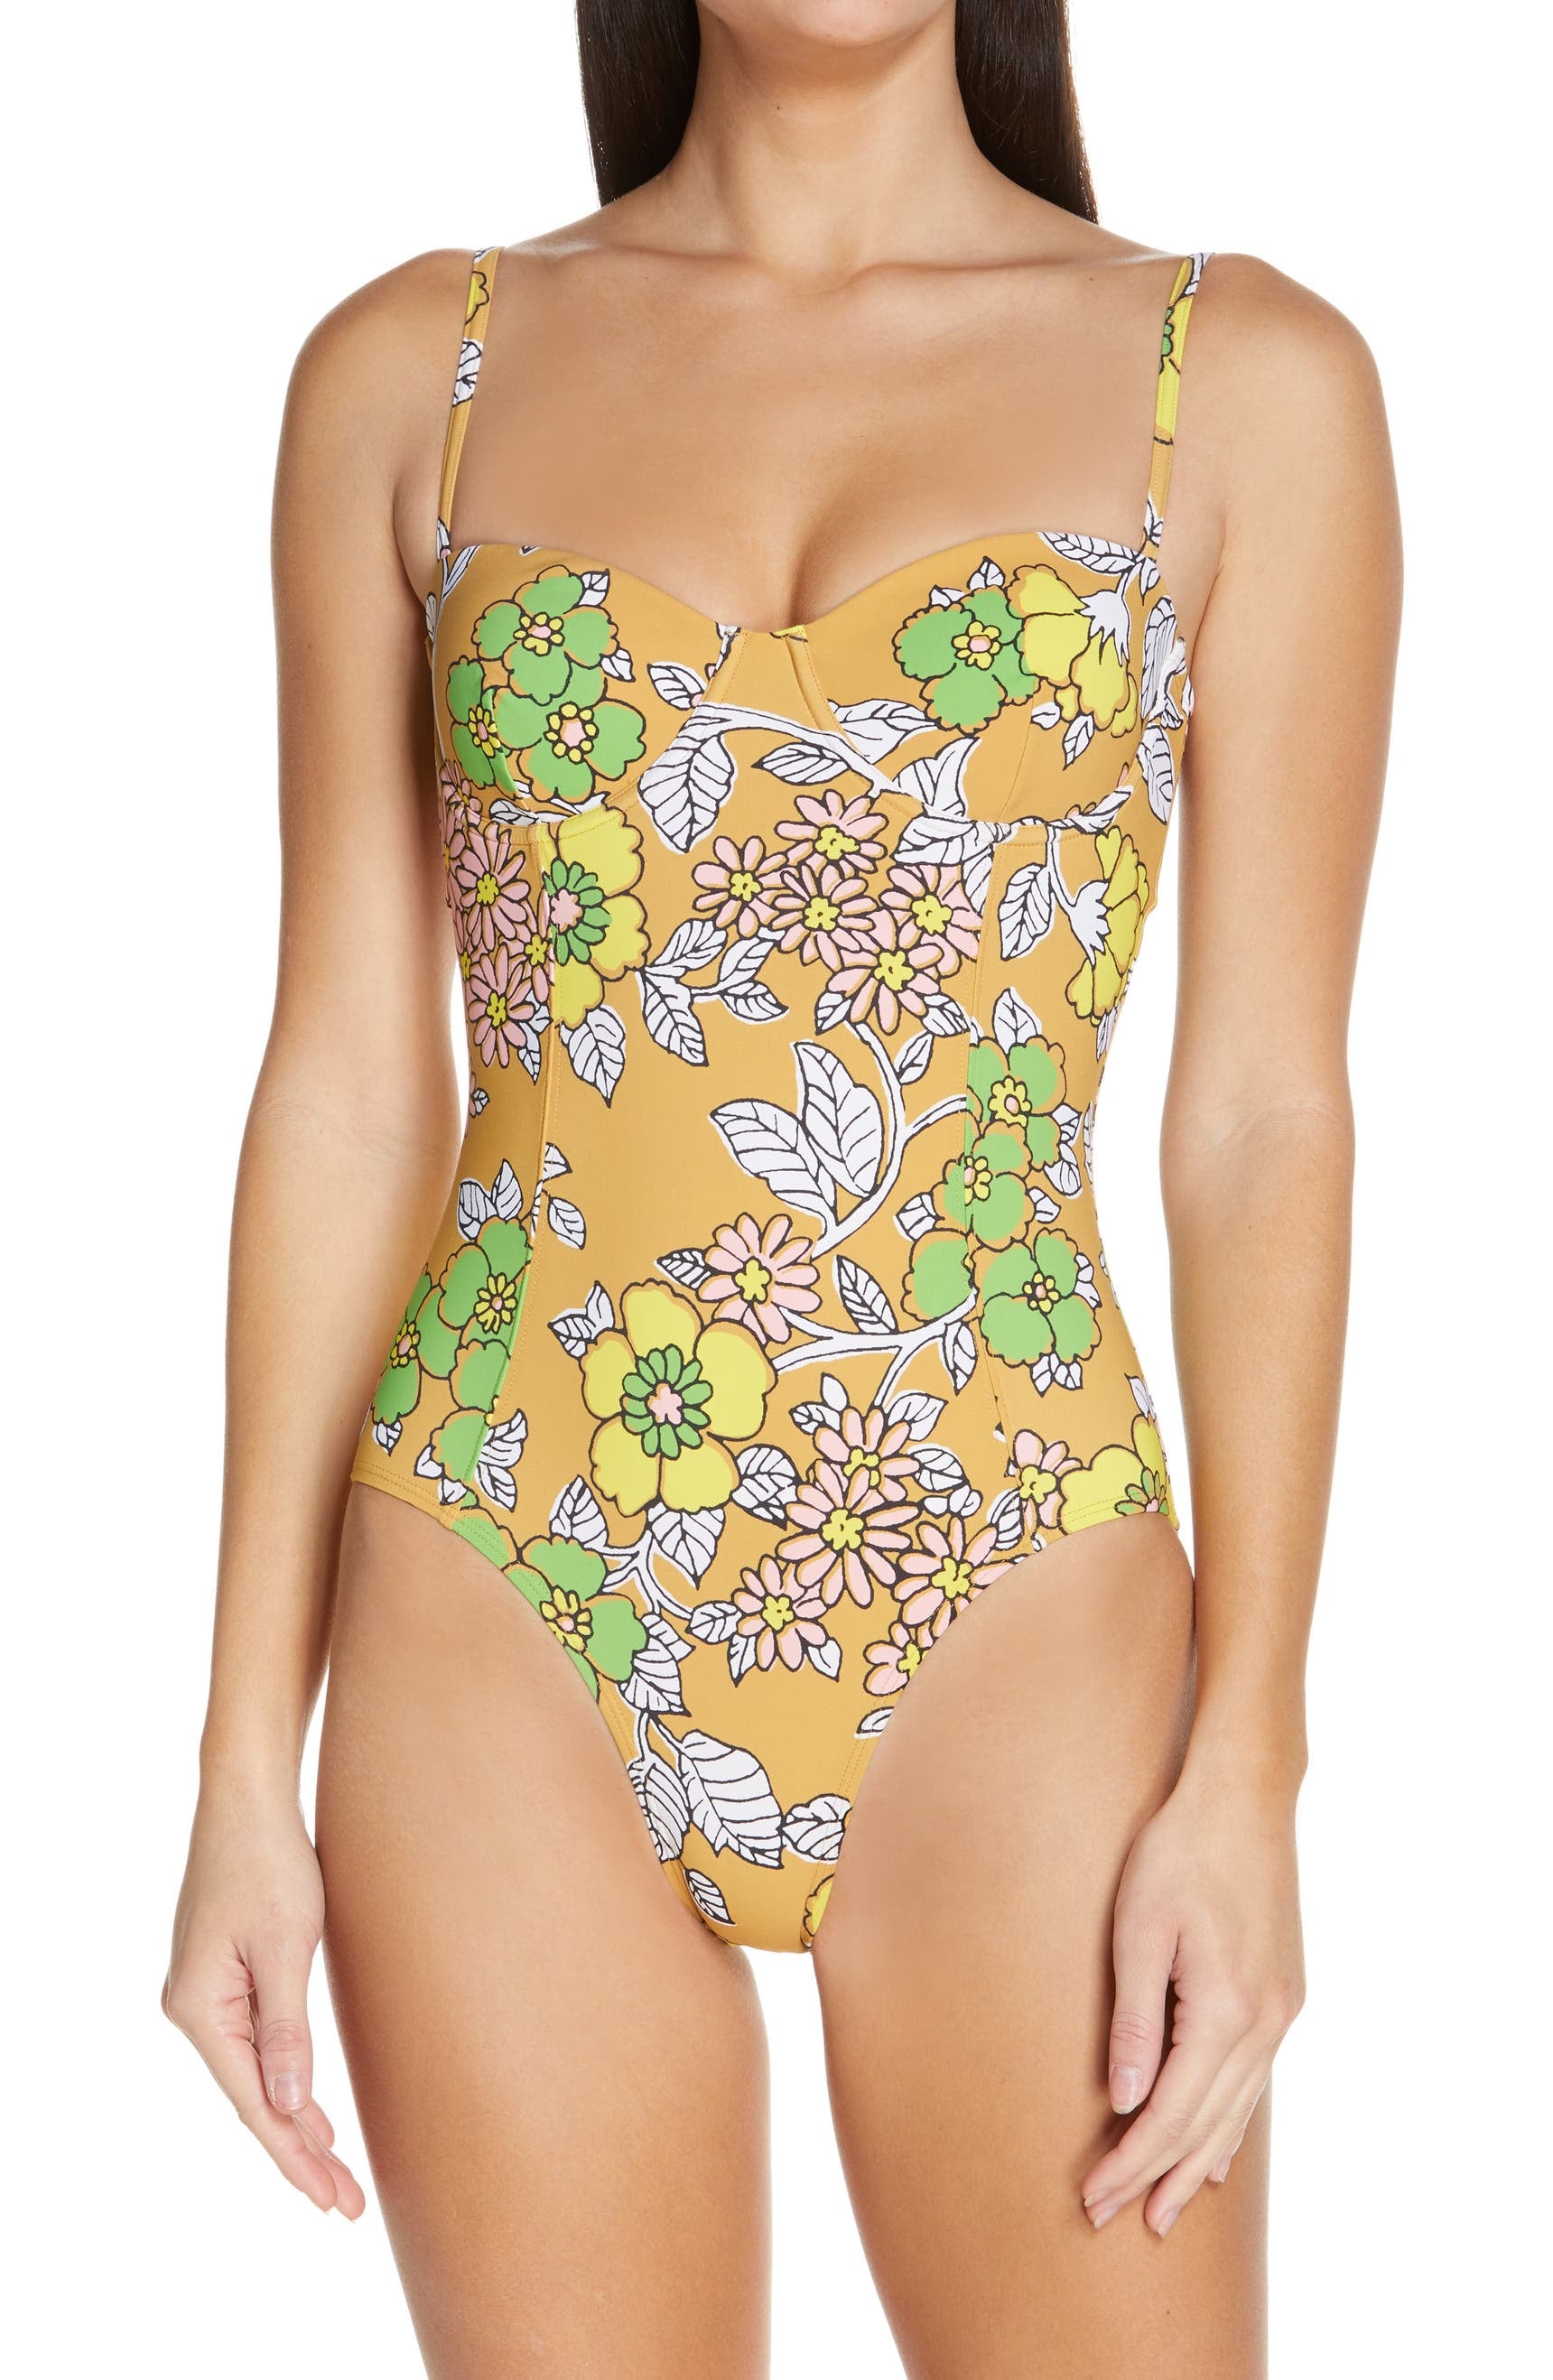 Tory Burch Floral Print Underwire One-Piece Swimsuit | These Bathing Suits  Scream Comfort and Style — and We Found Them on Sale! | POPSUGAR Fashion  Photo 12